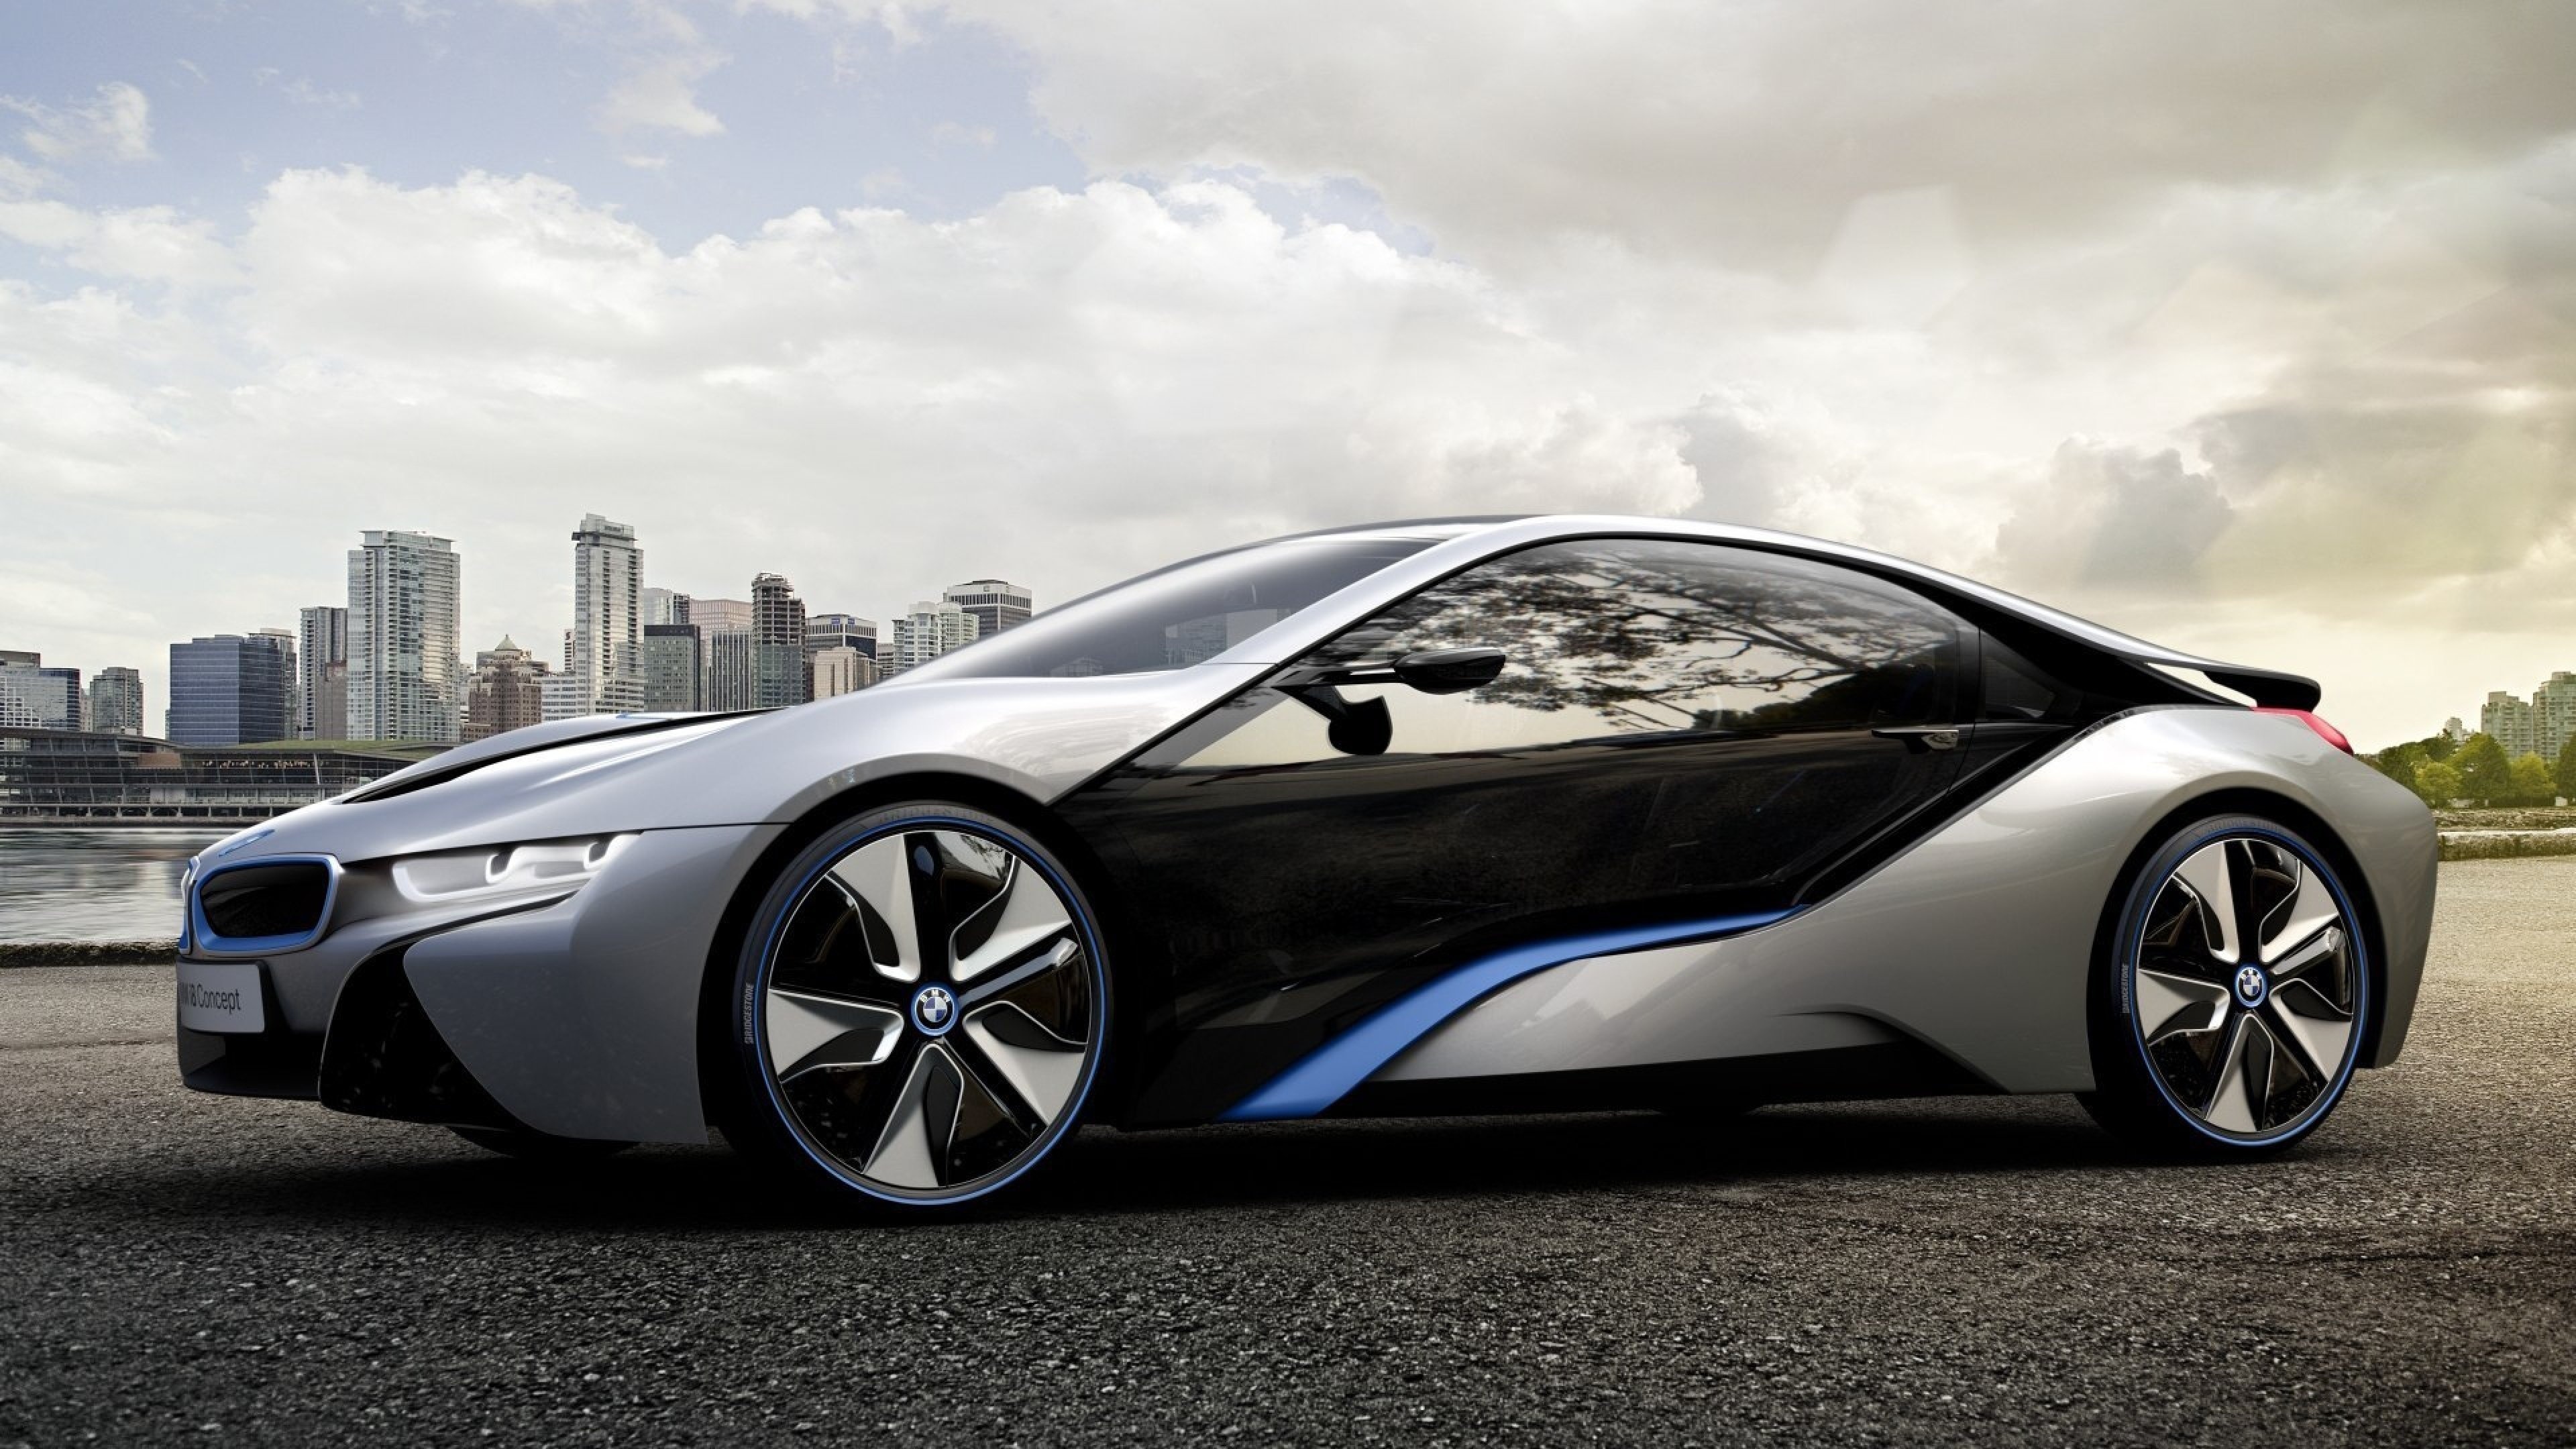 BMW i8, Sporty elegance, Fast and furious, High-performance hybrid, Driving perfection, 3840x2160 4K Desktop